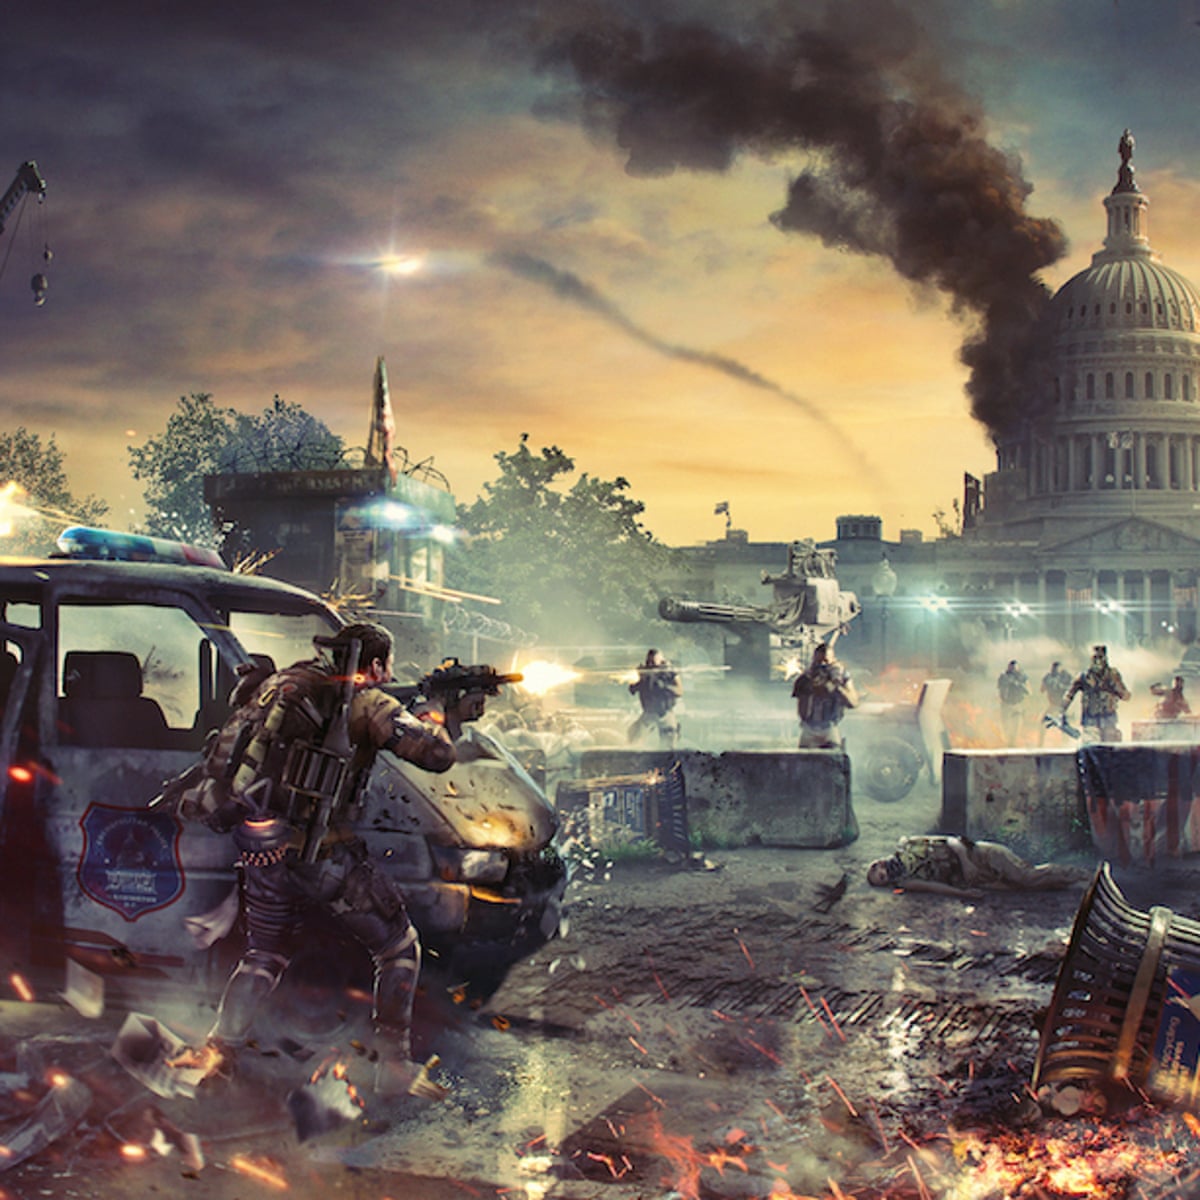 Ubisoft games are political, says CEO - just not the way you think, Games